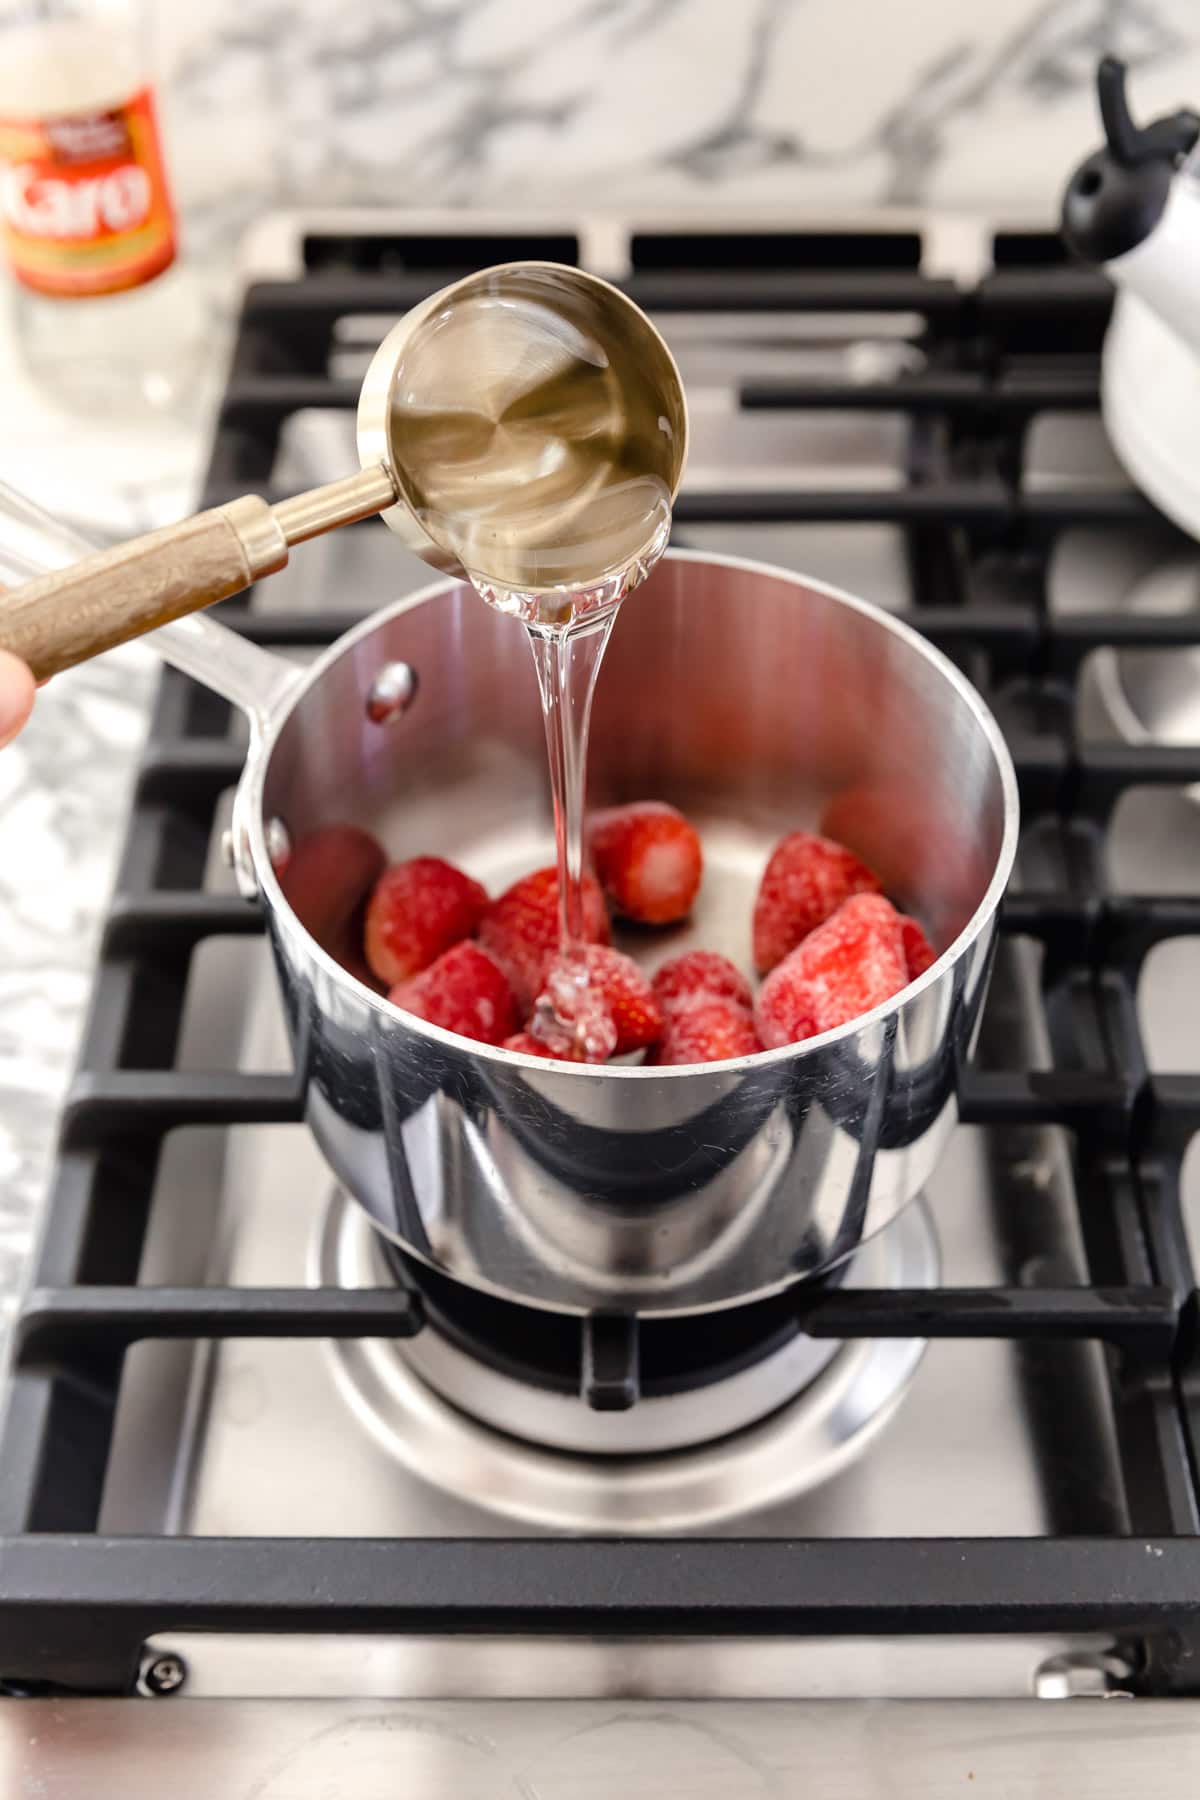 corn syrup and strawberries in a pot